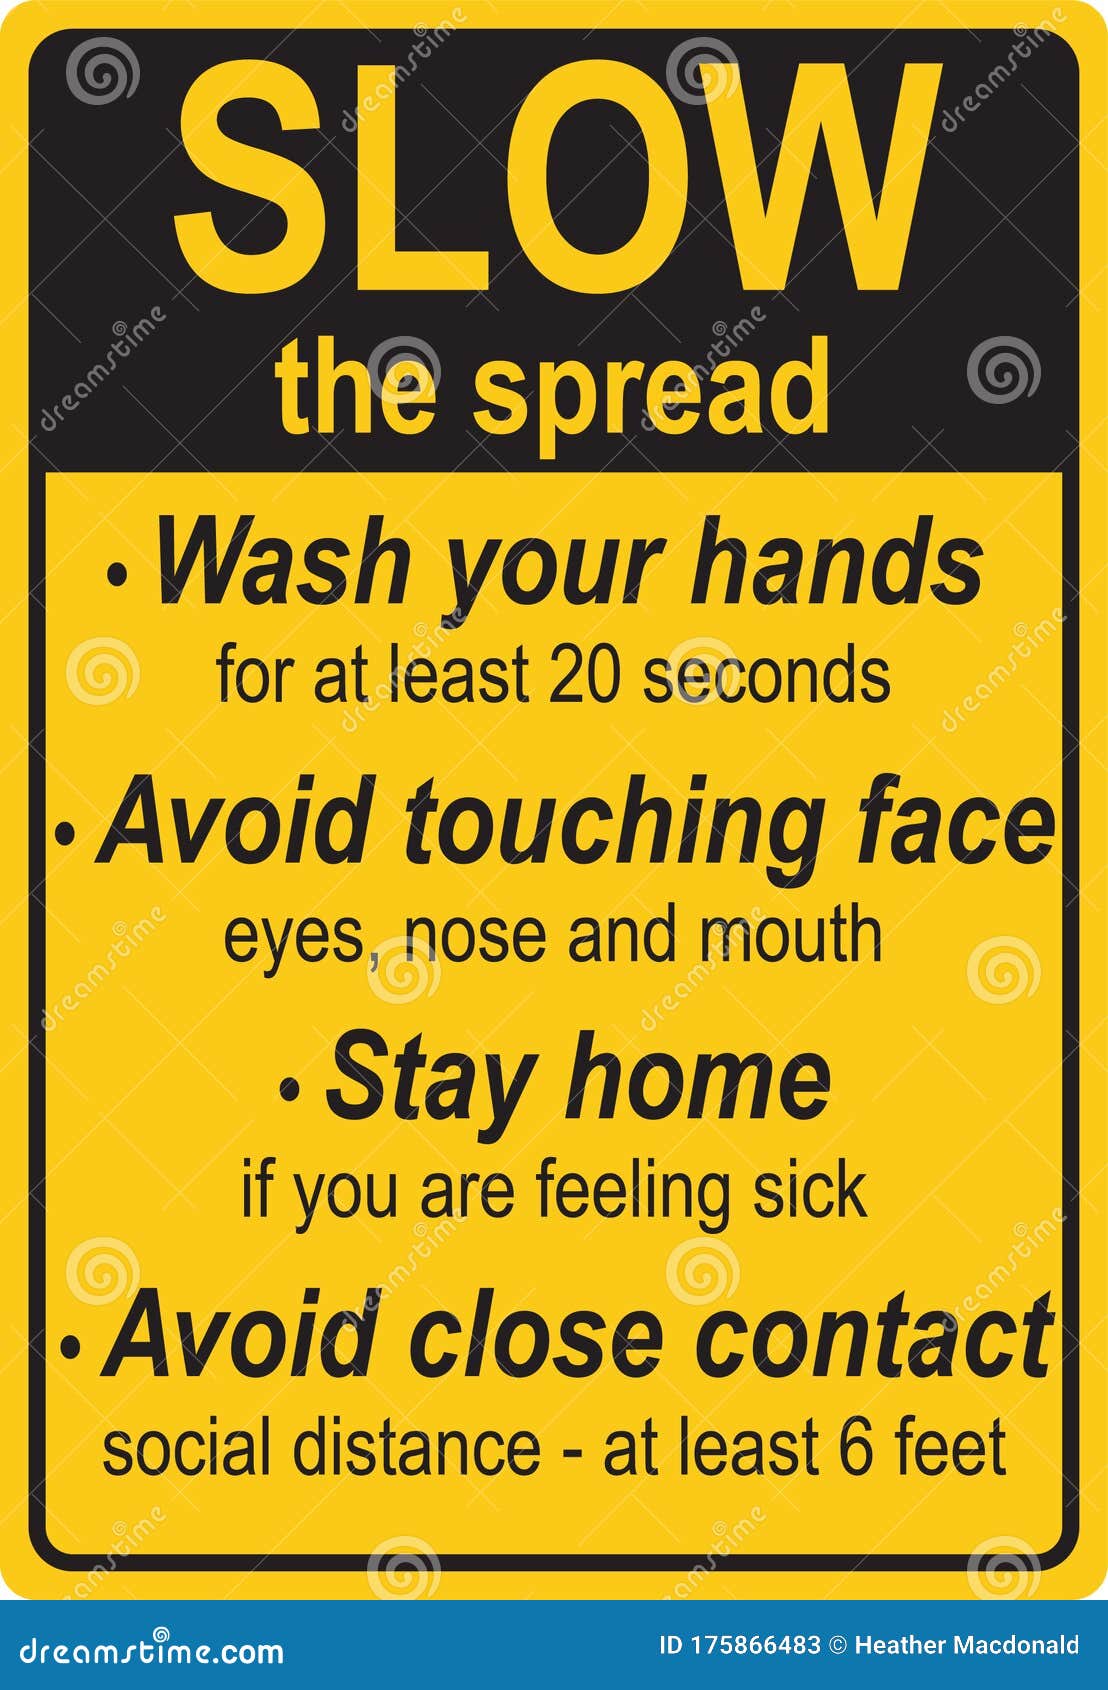 slow tarffic sign ed to remind people to slow the spread of a virus